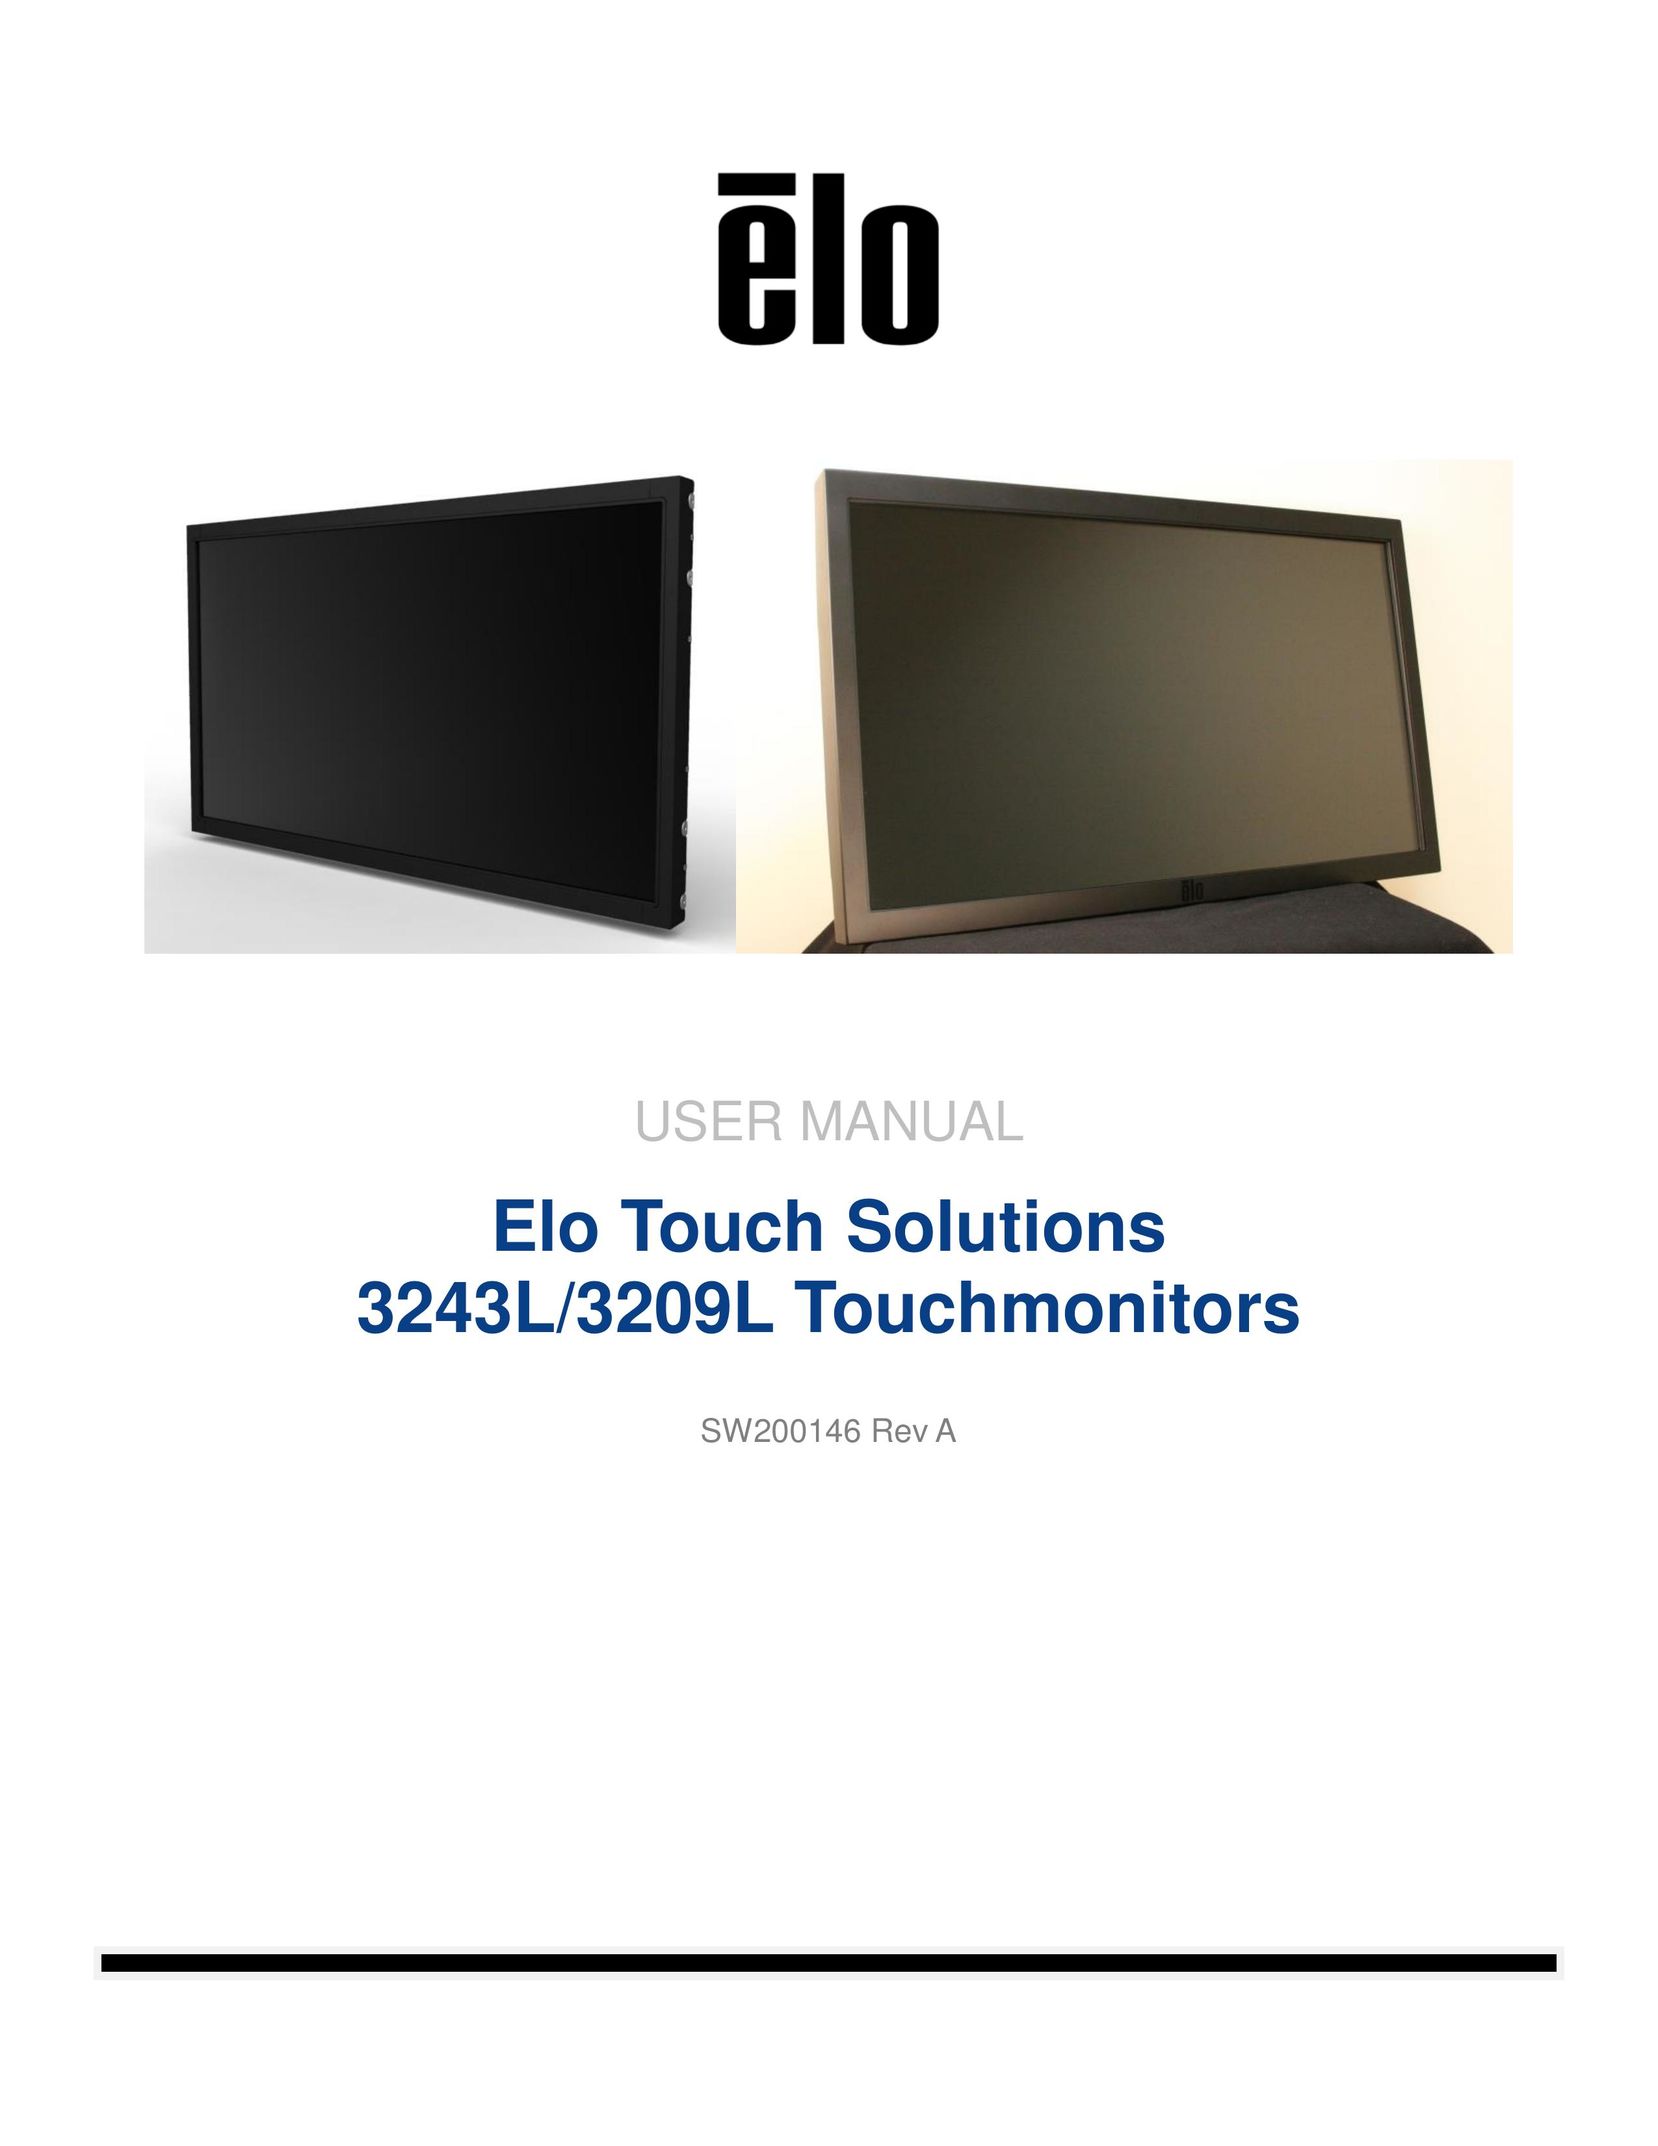 Elo TouchSystems 3243L/3209L Car Video System User Manual